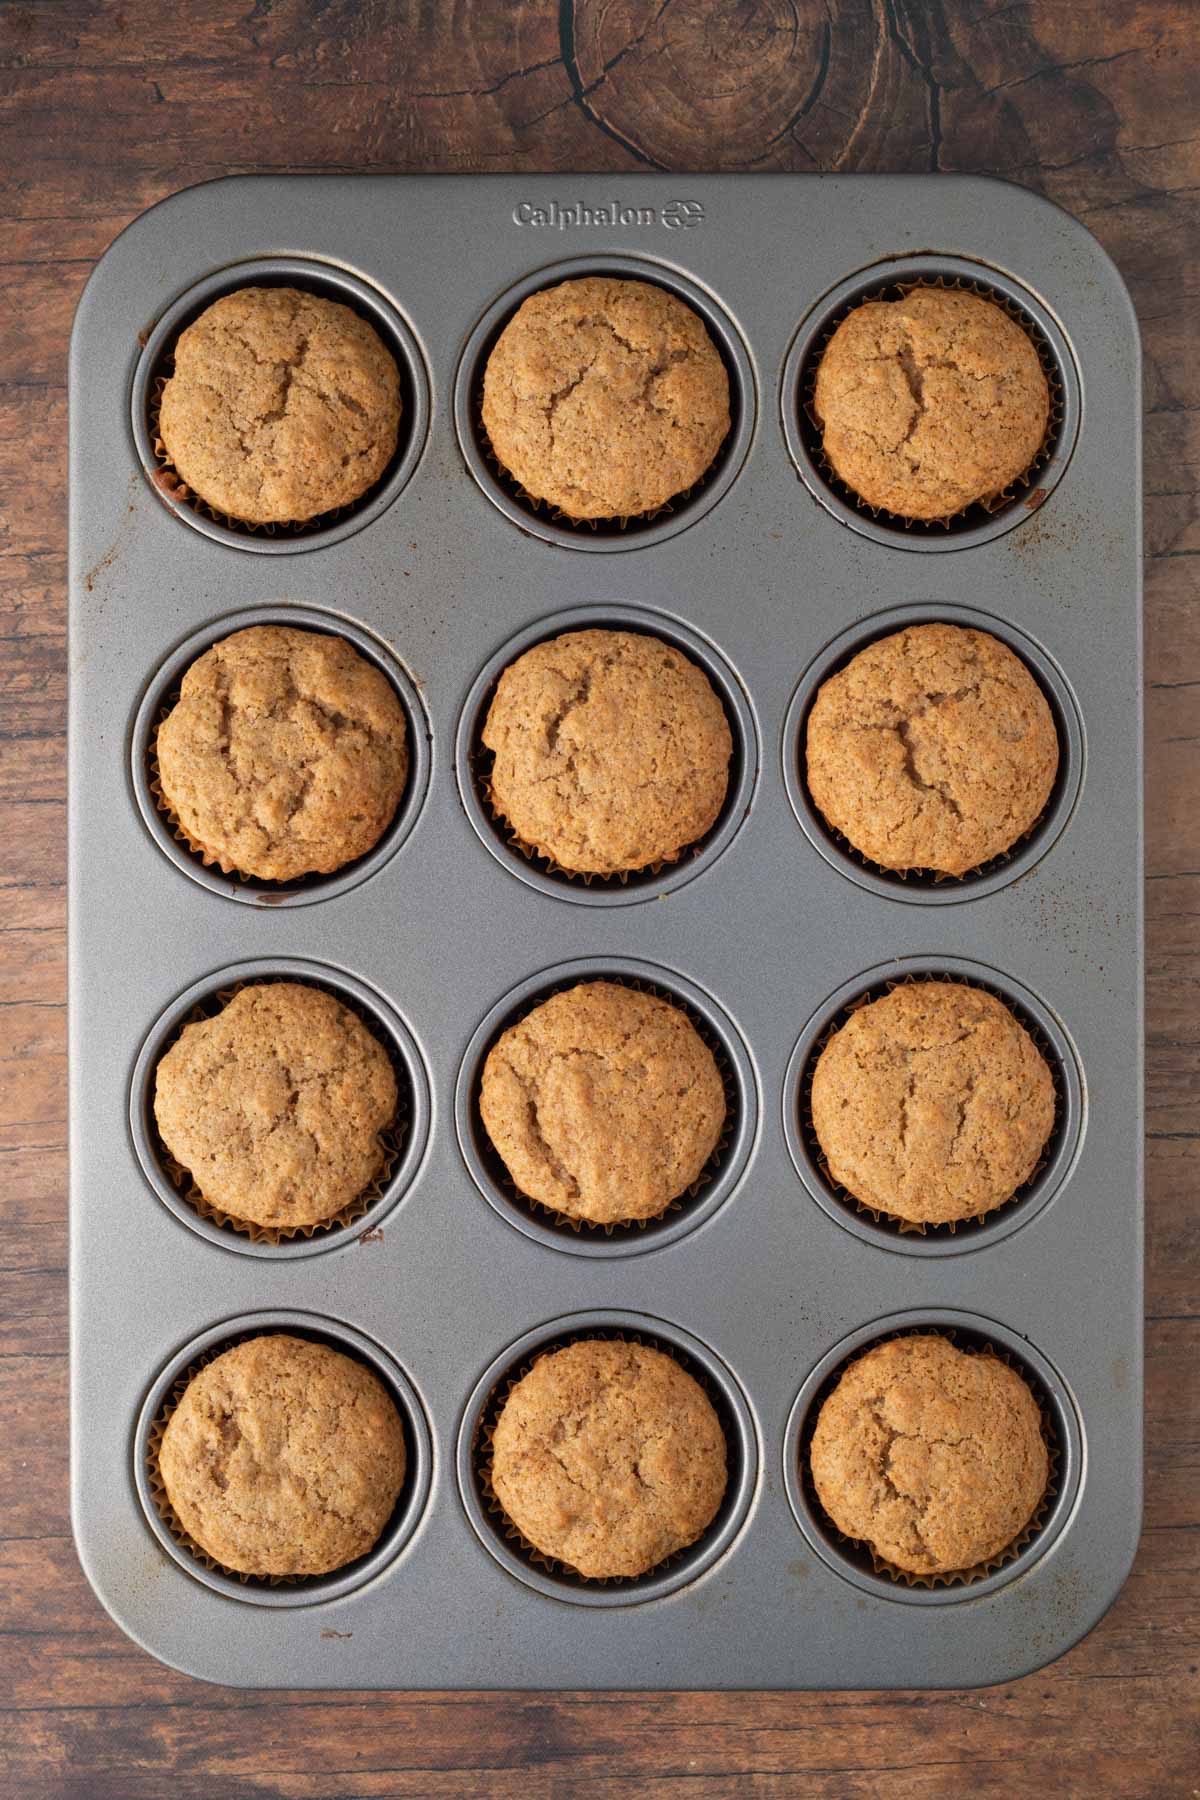 Applesauce Muffins baked in the tin